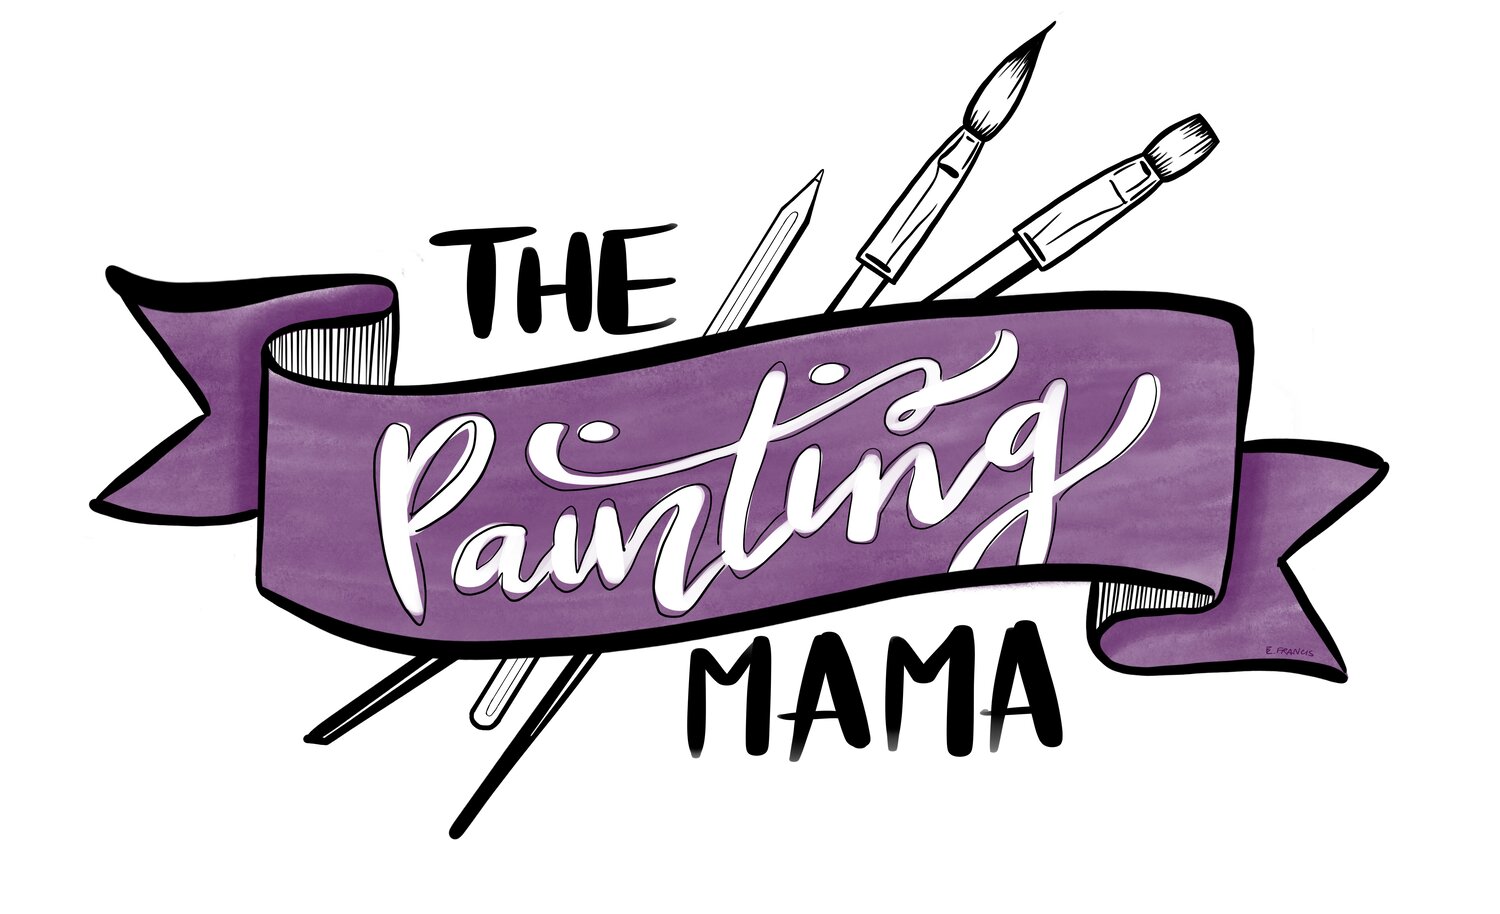 The Painting Mama